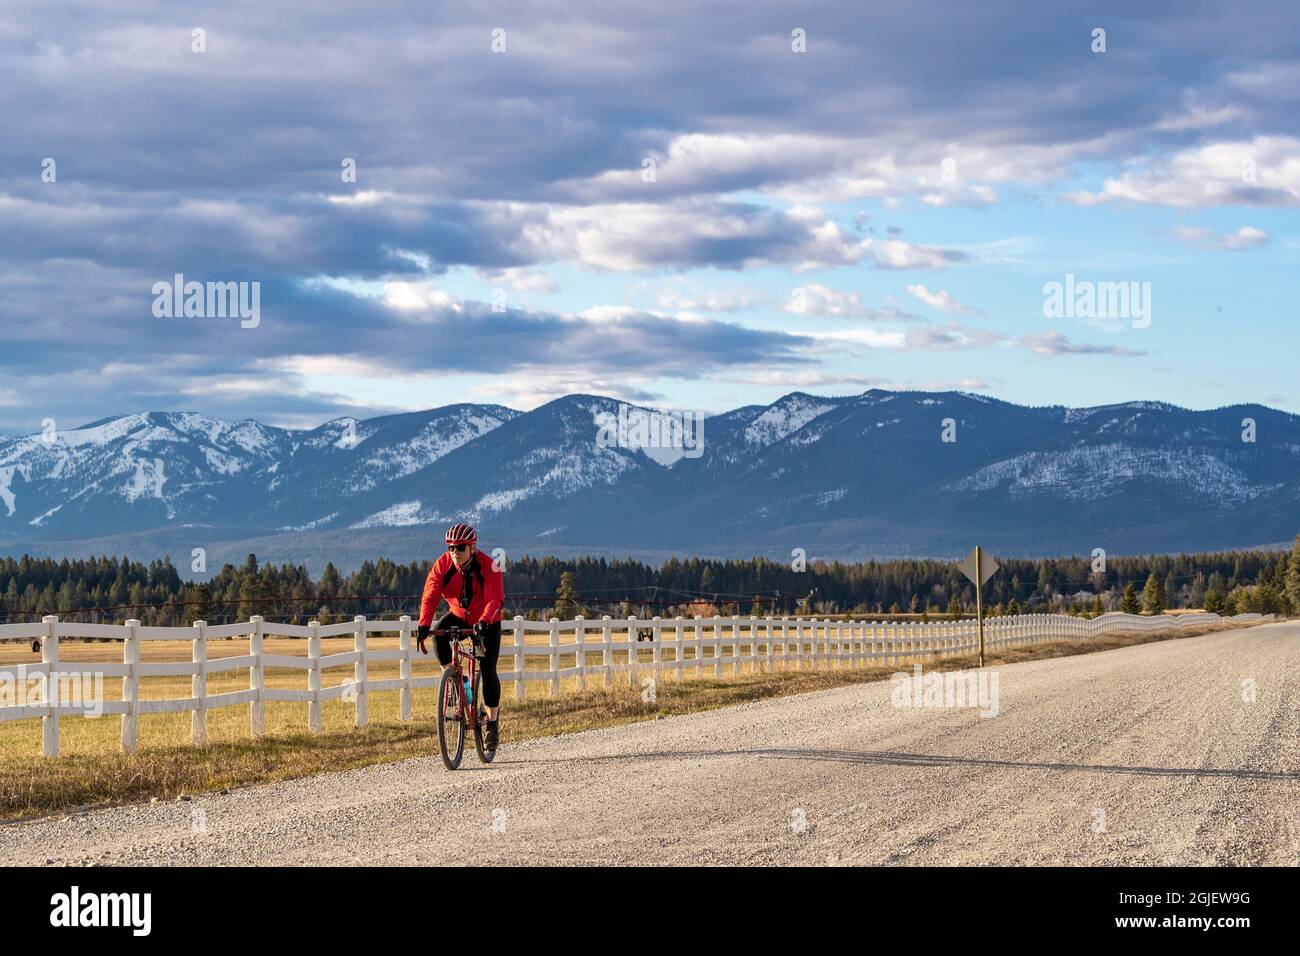 Bicycling on gravel roads of the Flathead Valley, Montana USA. (MR) Stock Photo